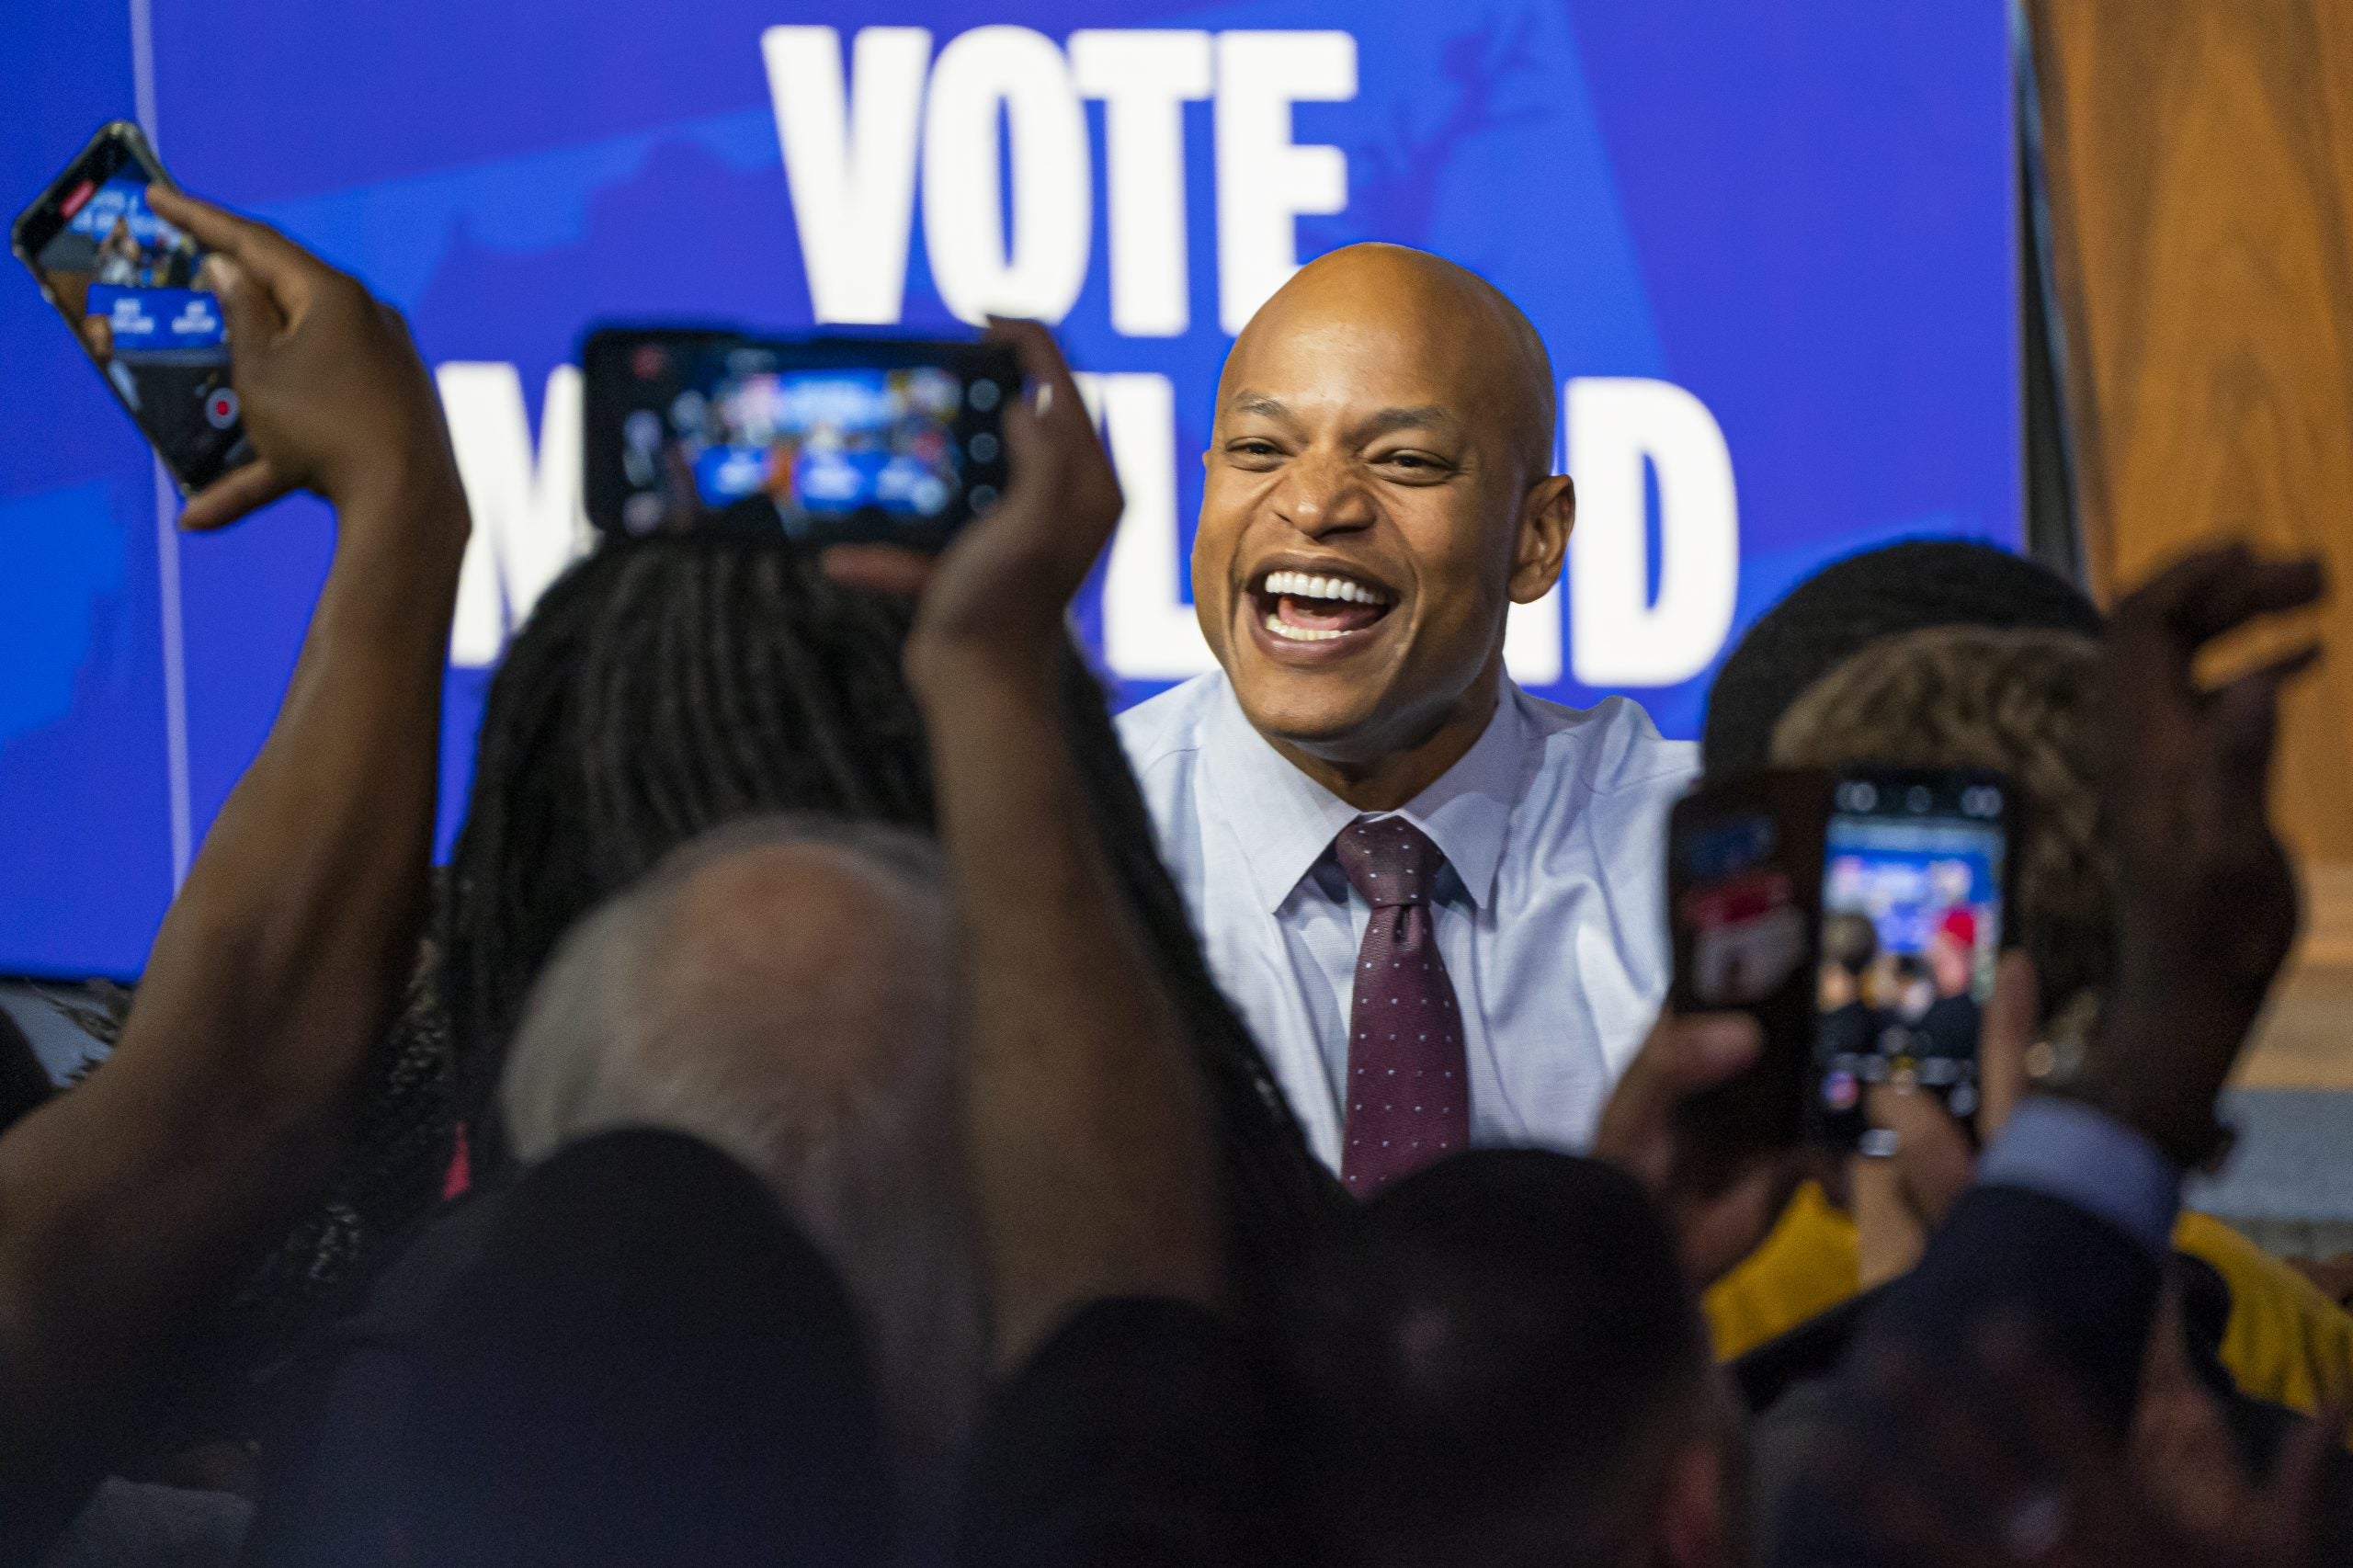 Maryland Elects Wes Moore As First Black Governor